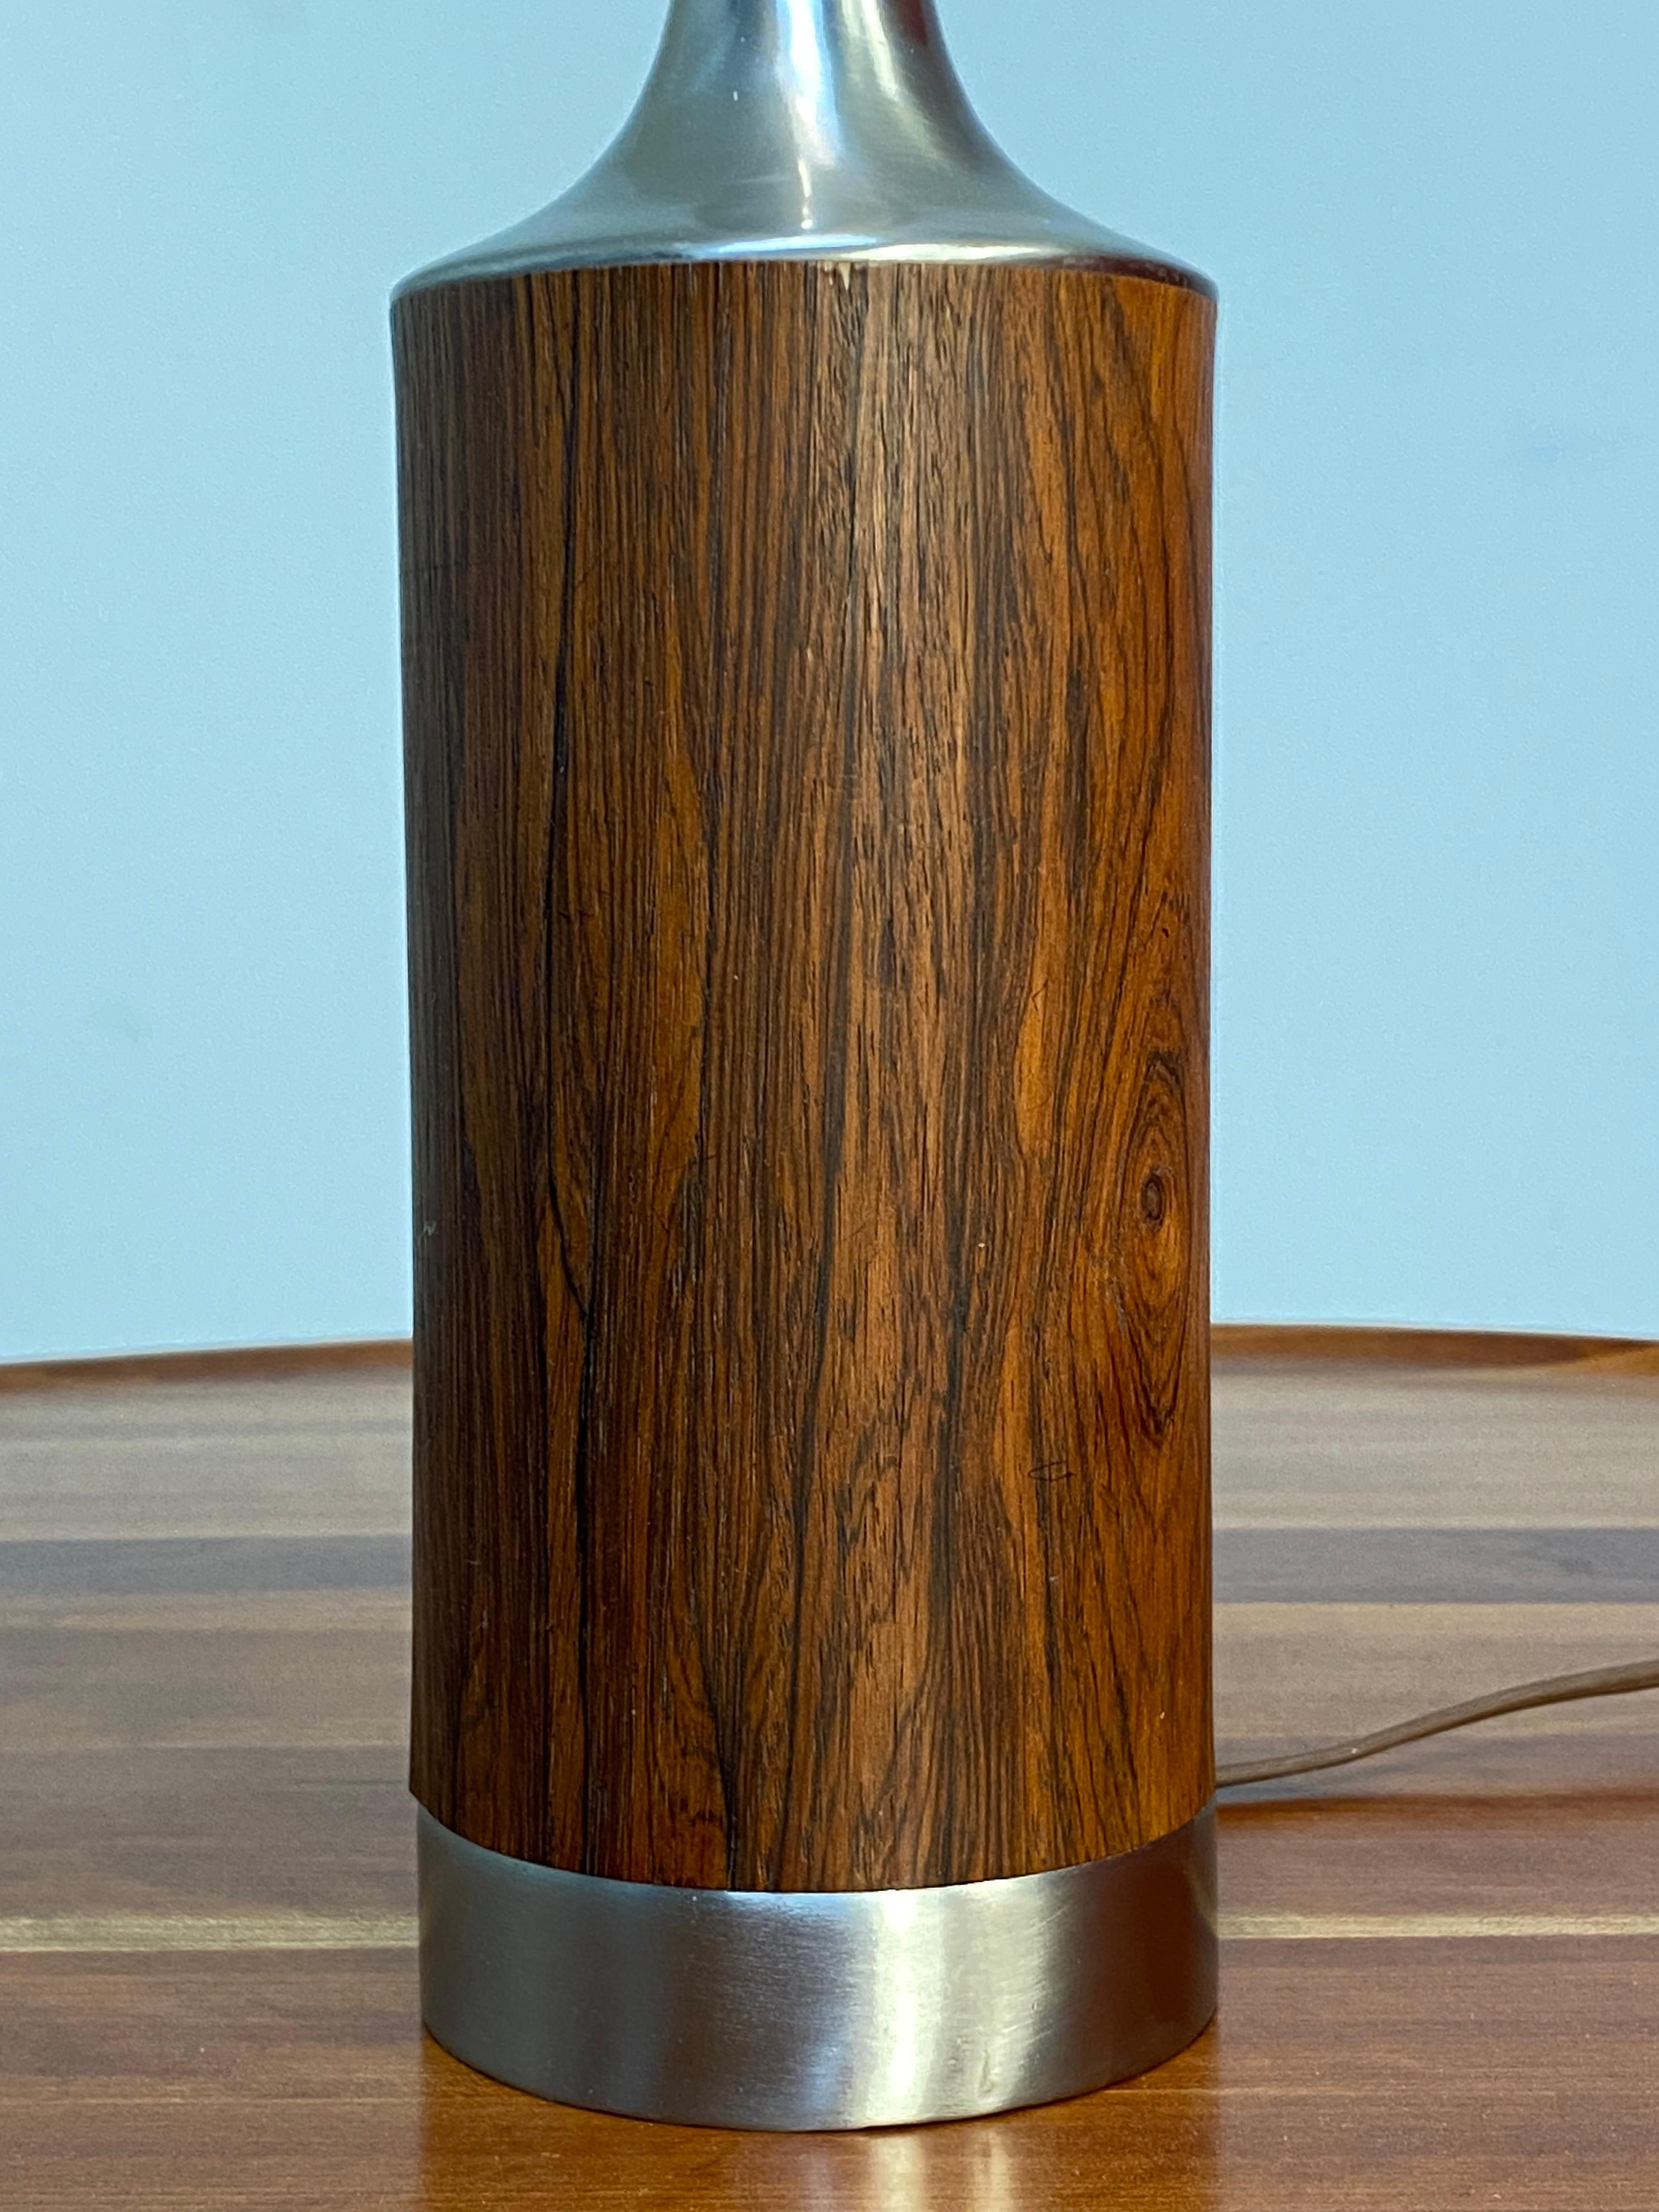 Genuine rosewood attached to the matte chrome finish. A small table lamp ideal for a credenza or bedroom. The harp can be exchanges out. Light Switch at the 16